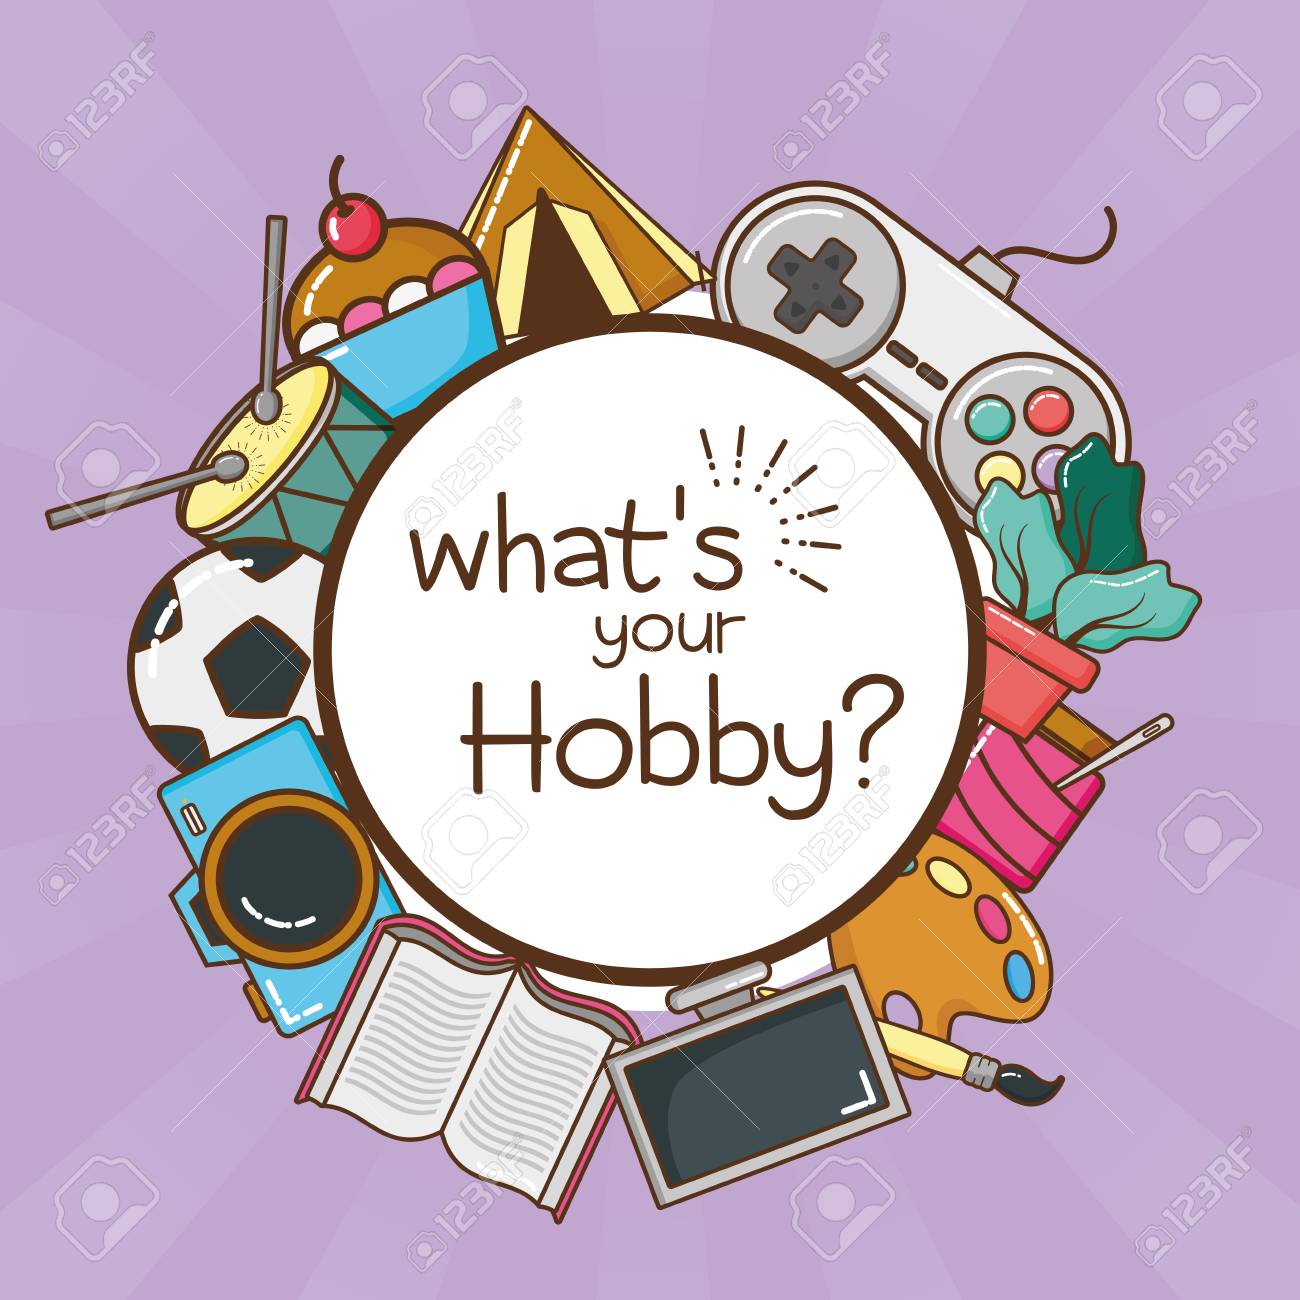 124624756-whats-your-my-hobby-vector-illustration-design.jpg